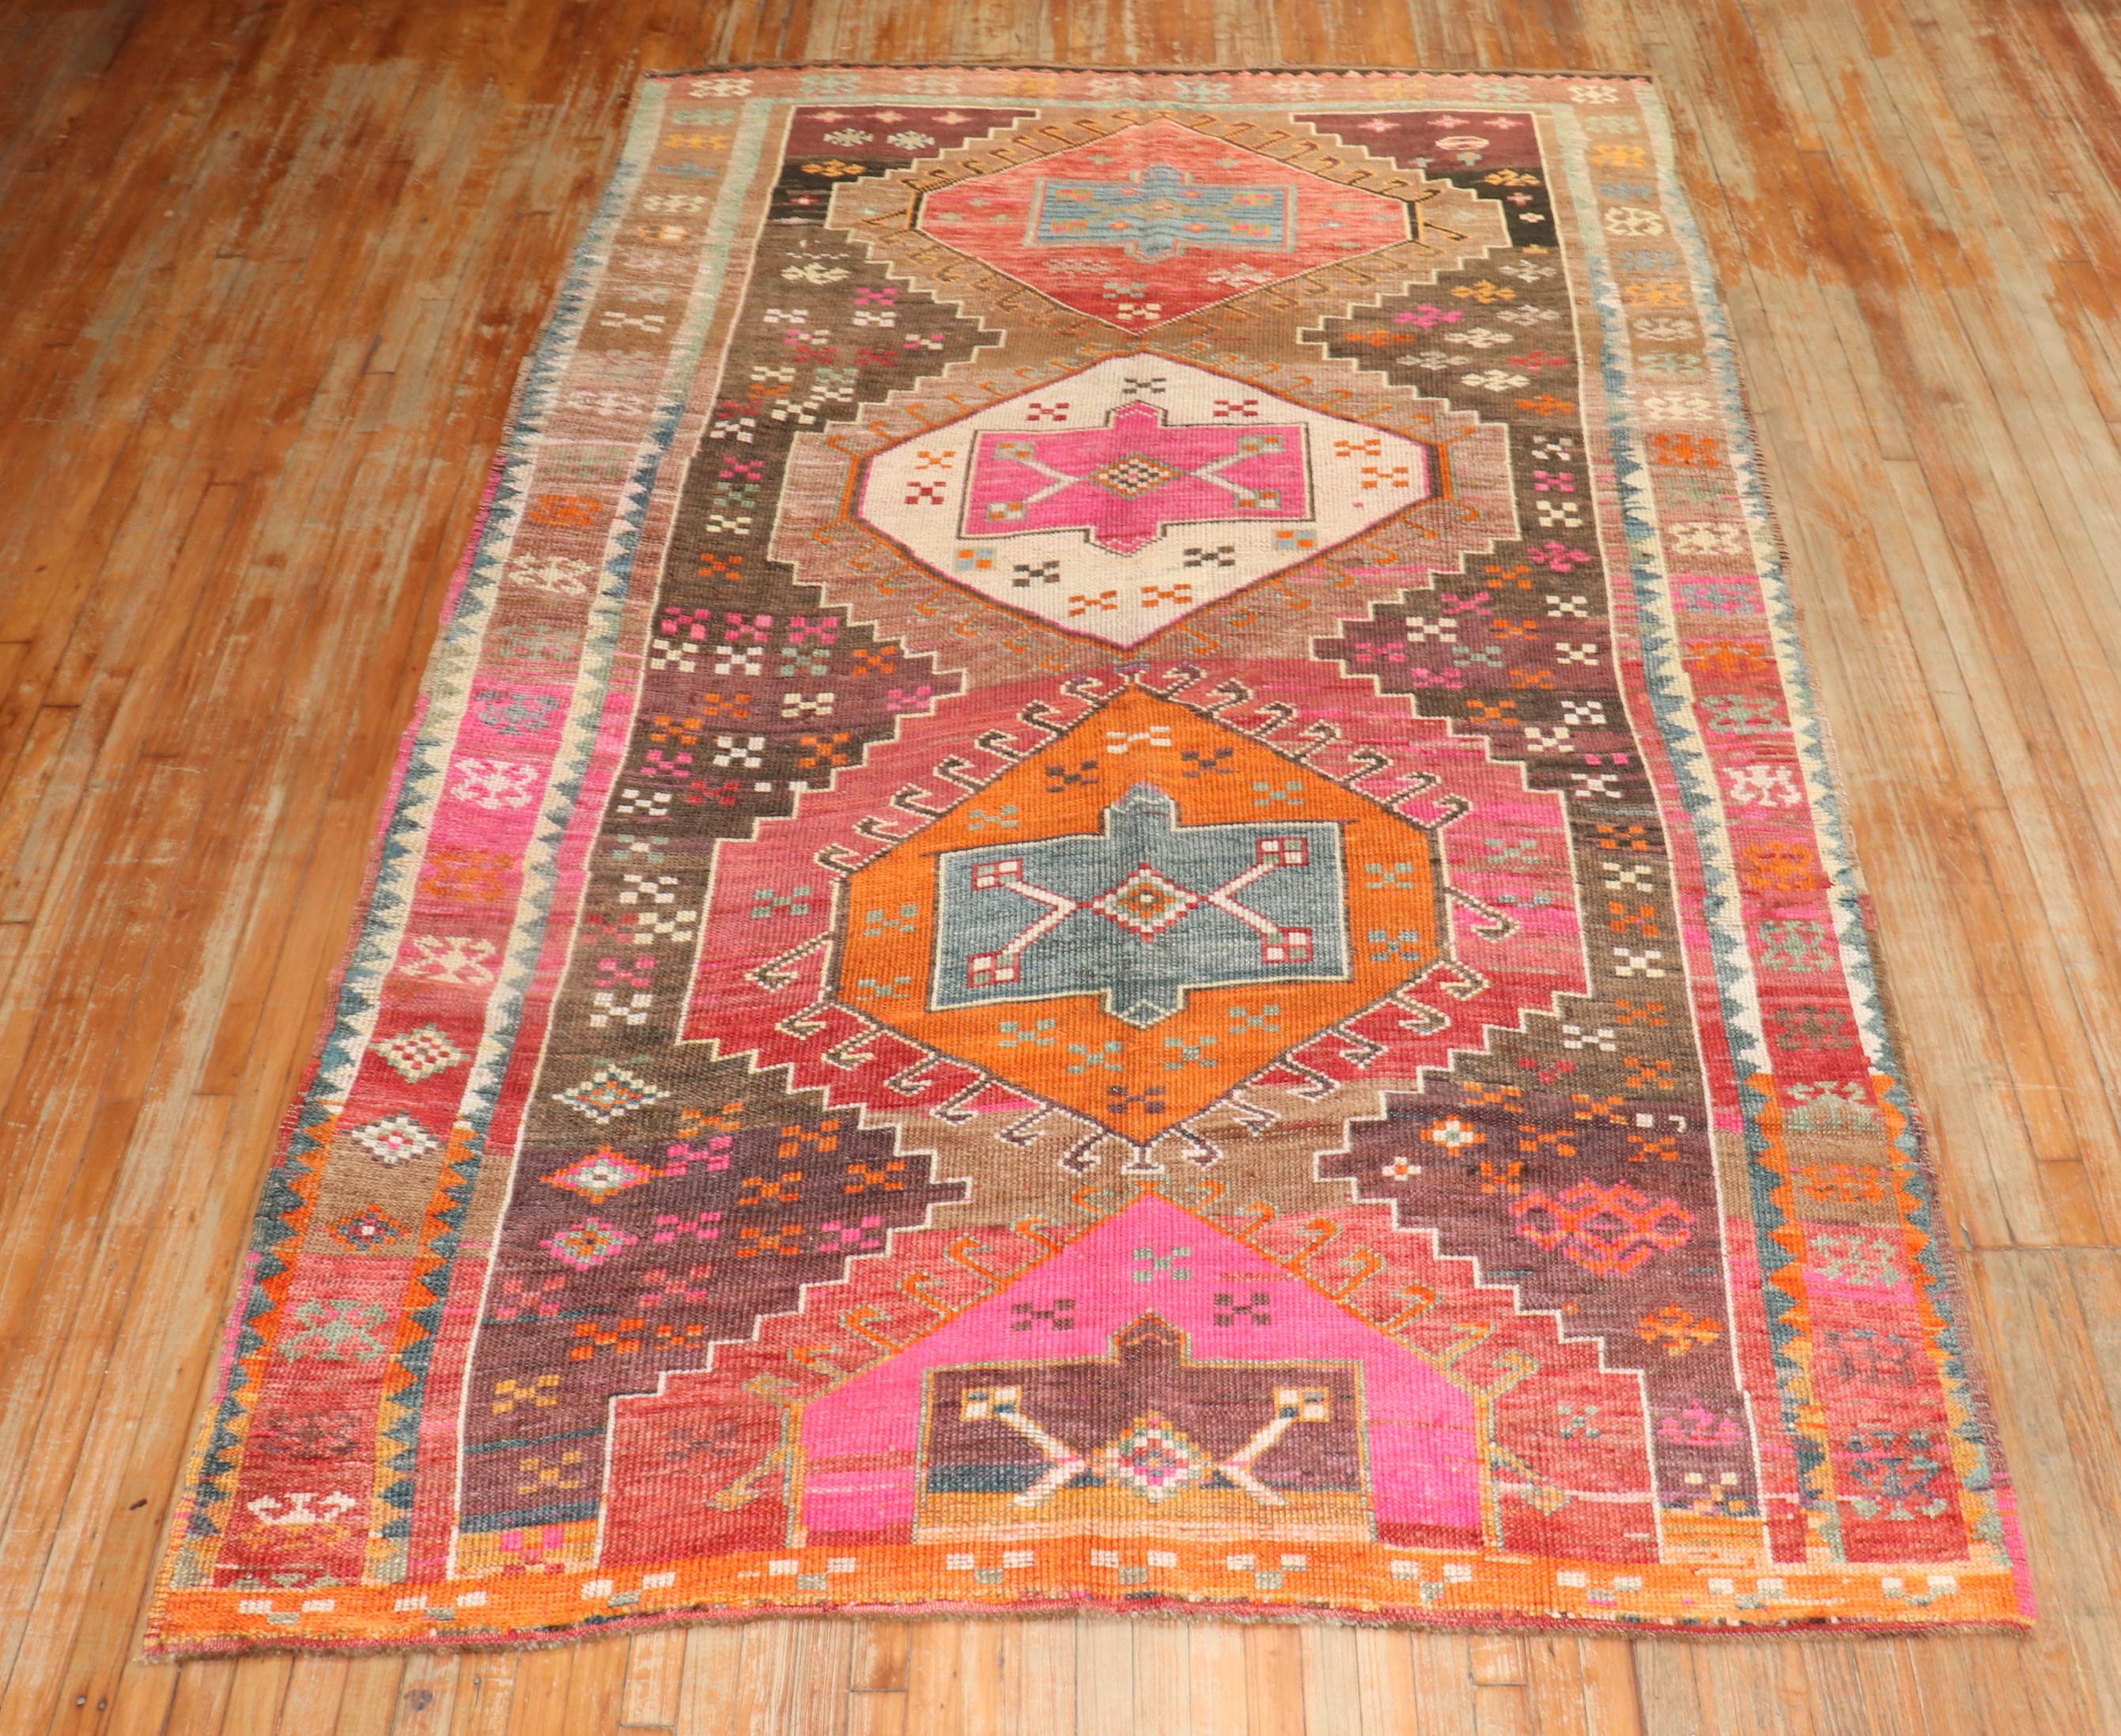 Mid 20th century Turkish Kars rug with a large-scale design in fun colors

Measures: 6'7